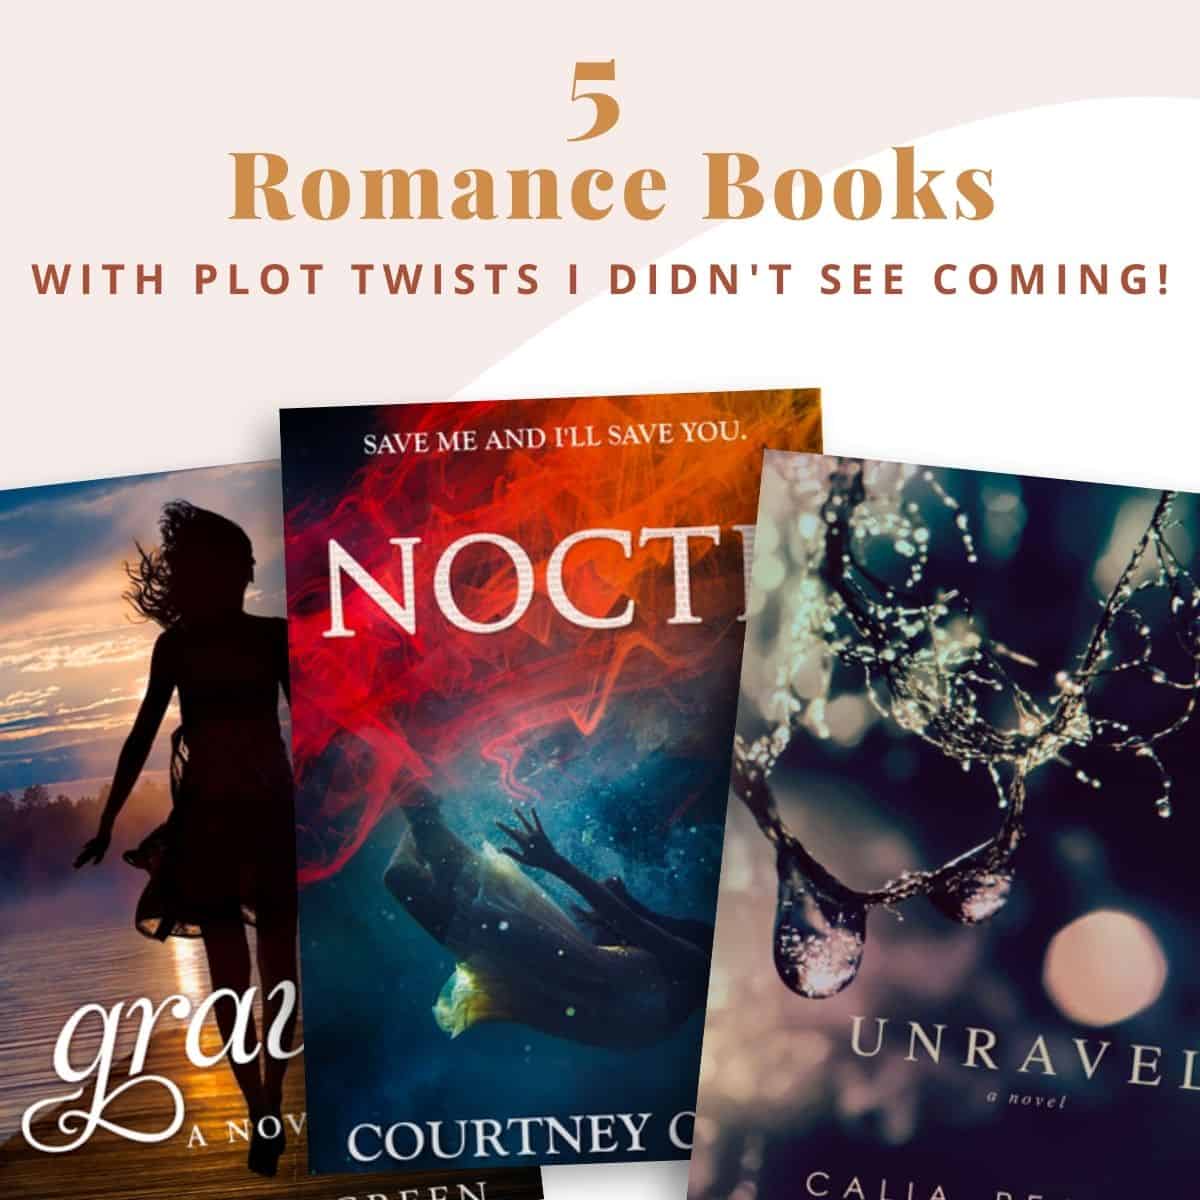 Do you love dark and twisty romance novels that mess with your head? Here's a list of five romances with huge twists and surprise endings that you won't see coming!